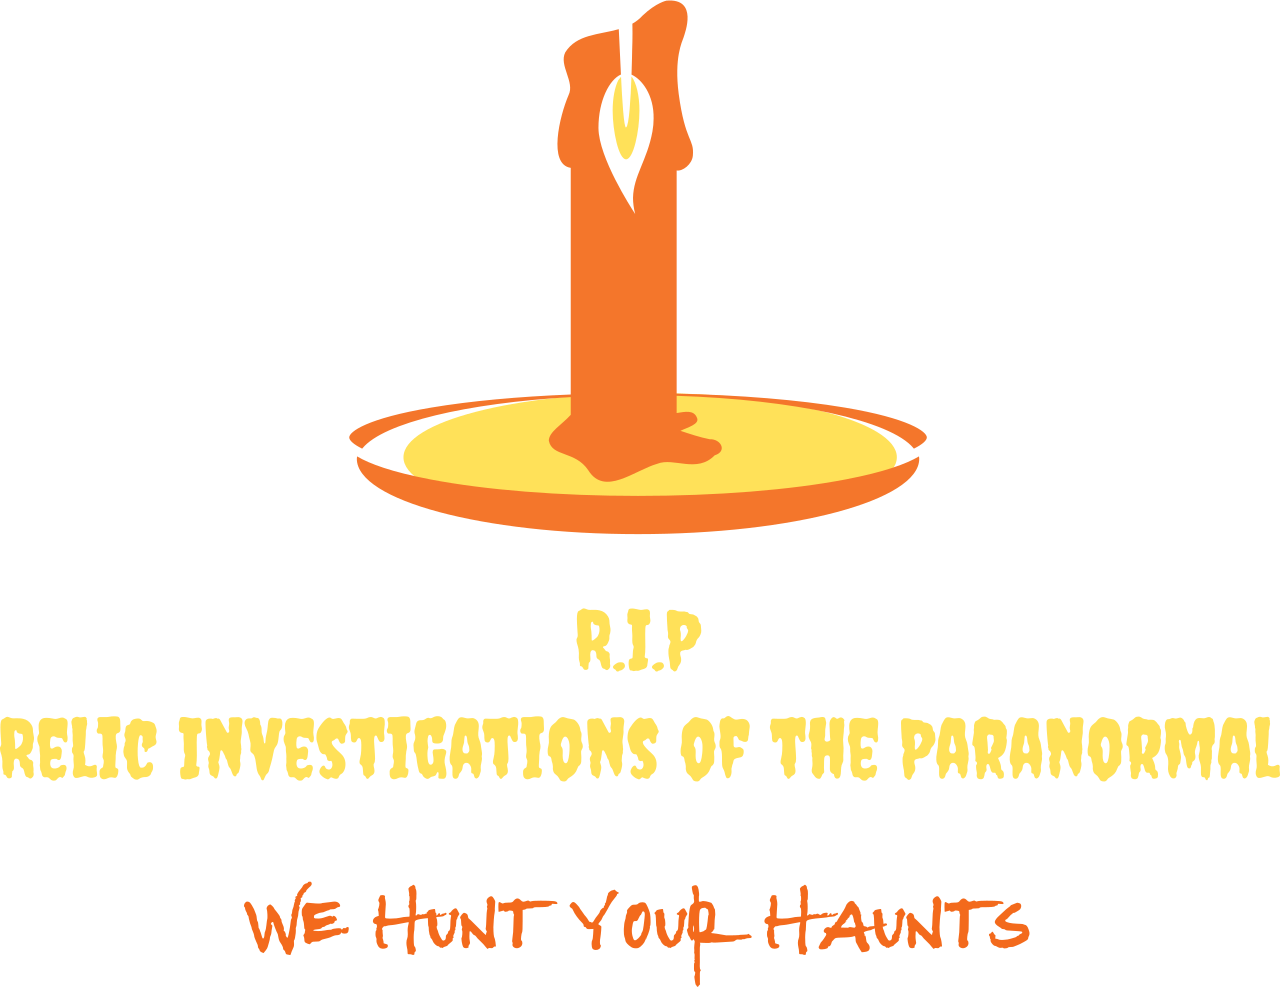 R.I.P
Relic Investigations of the Paranormal's logo